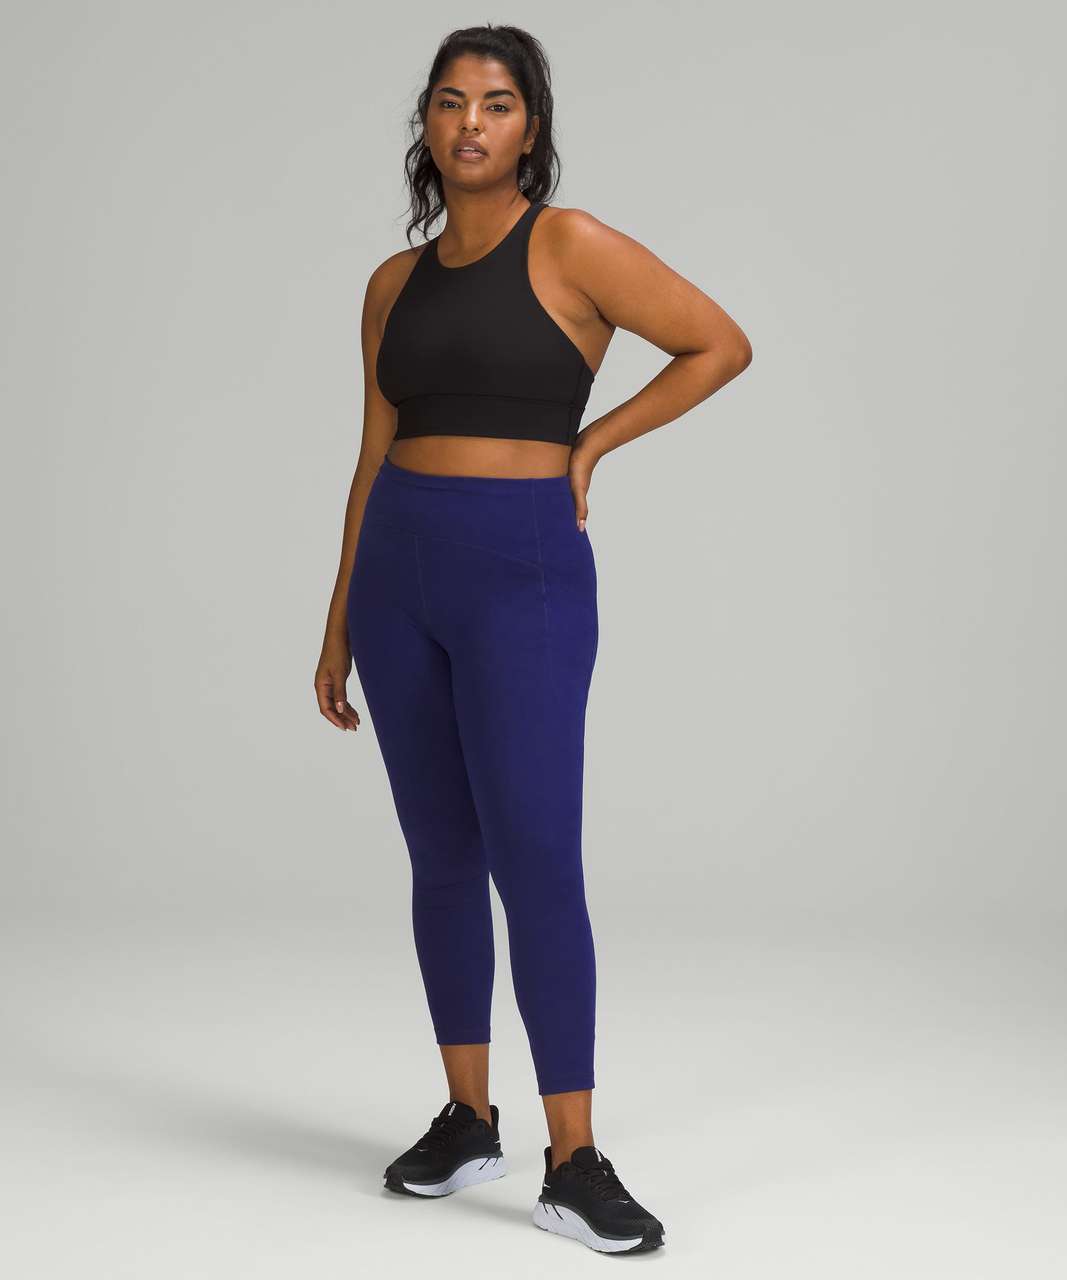 Lululemon NWT x Madhappy Swift Speed Tight 25 Size 0 - FREE SHIP Black -  $120 (13% Off Retail) New With Tags - From Kao